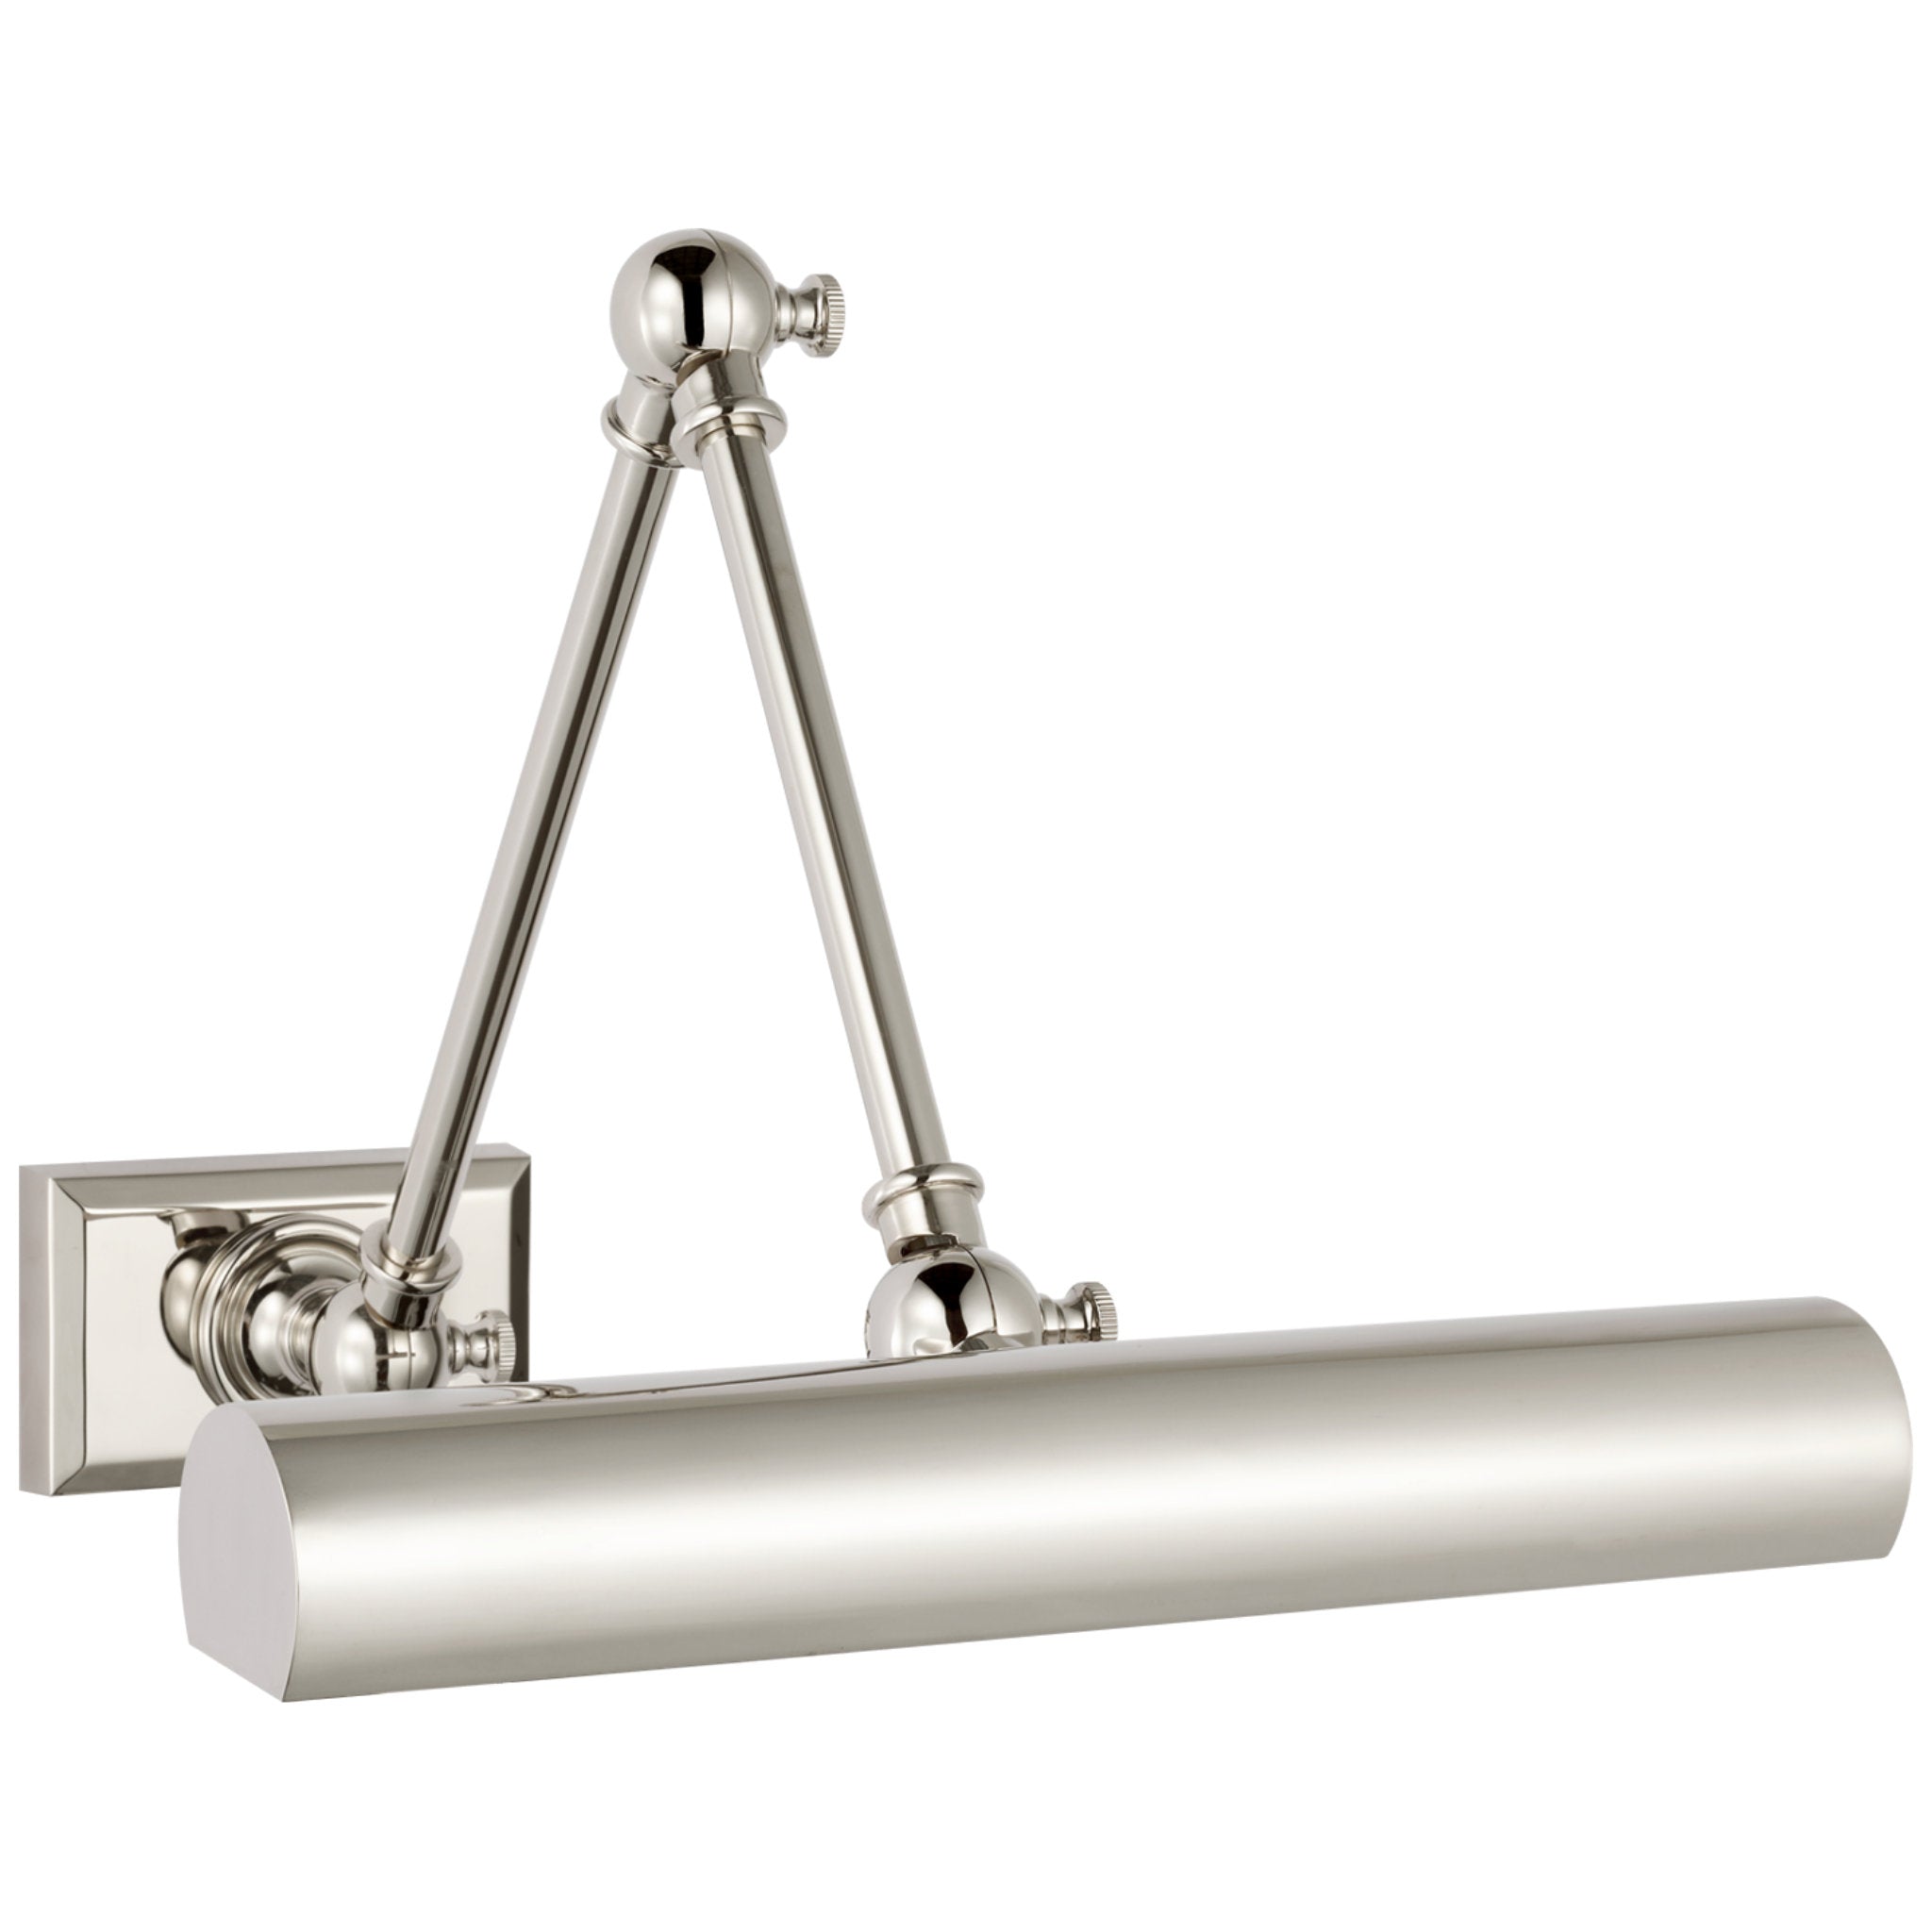 Chapman & Myers Cabinet Maker 12" Double Library Light in Polished Nickel